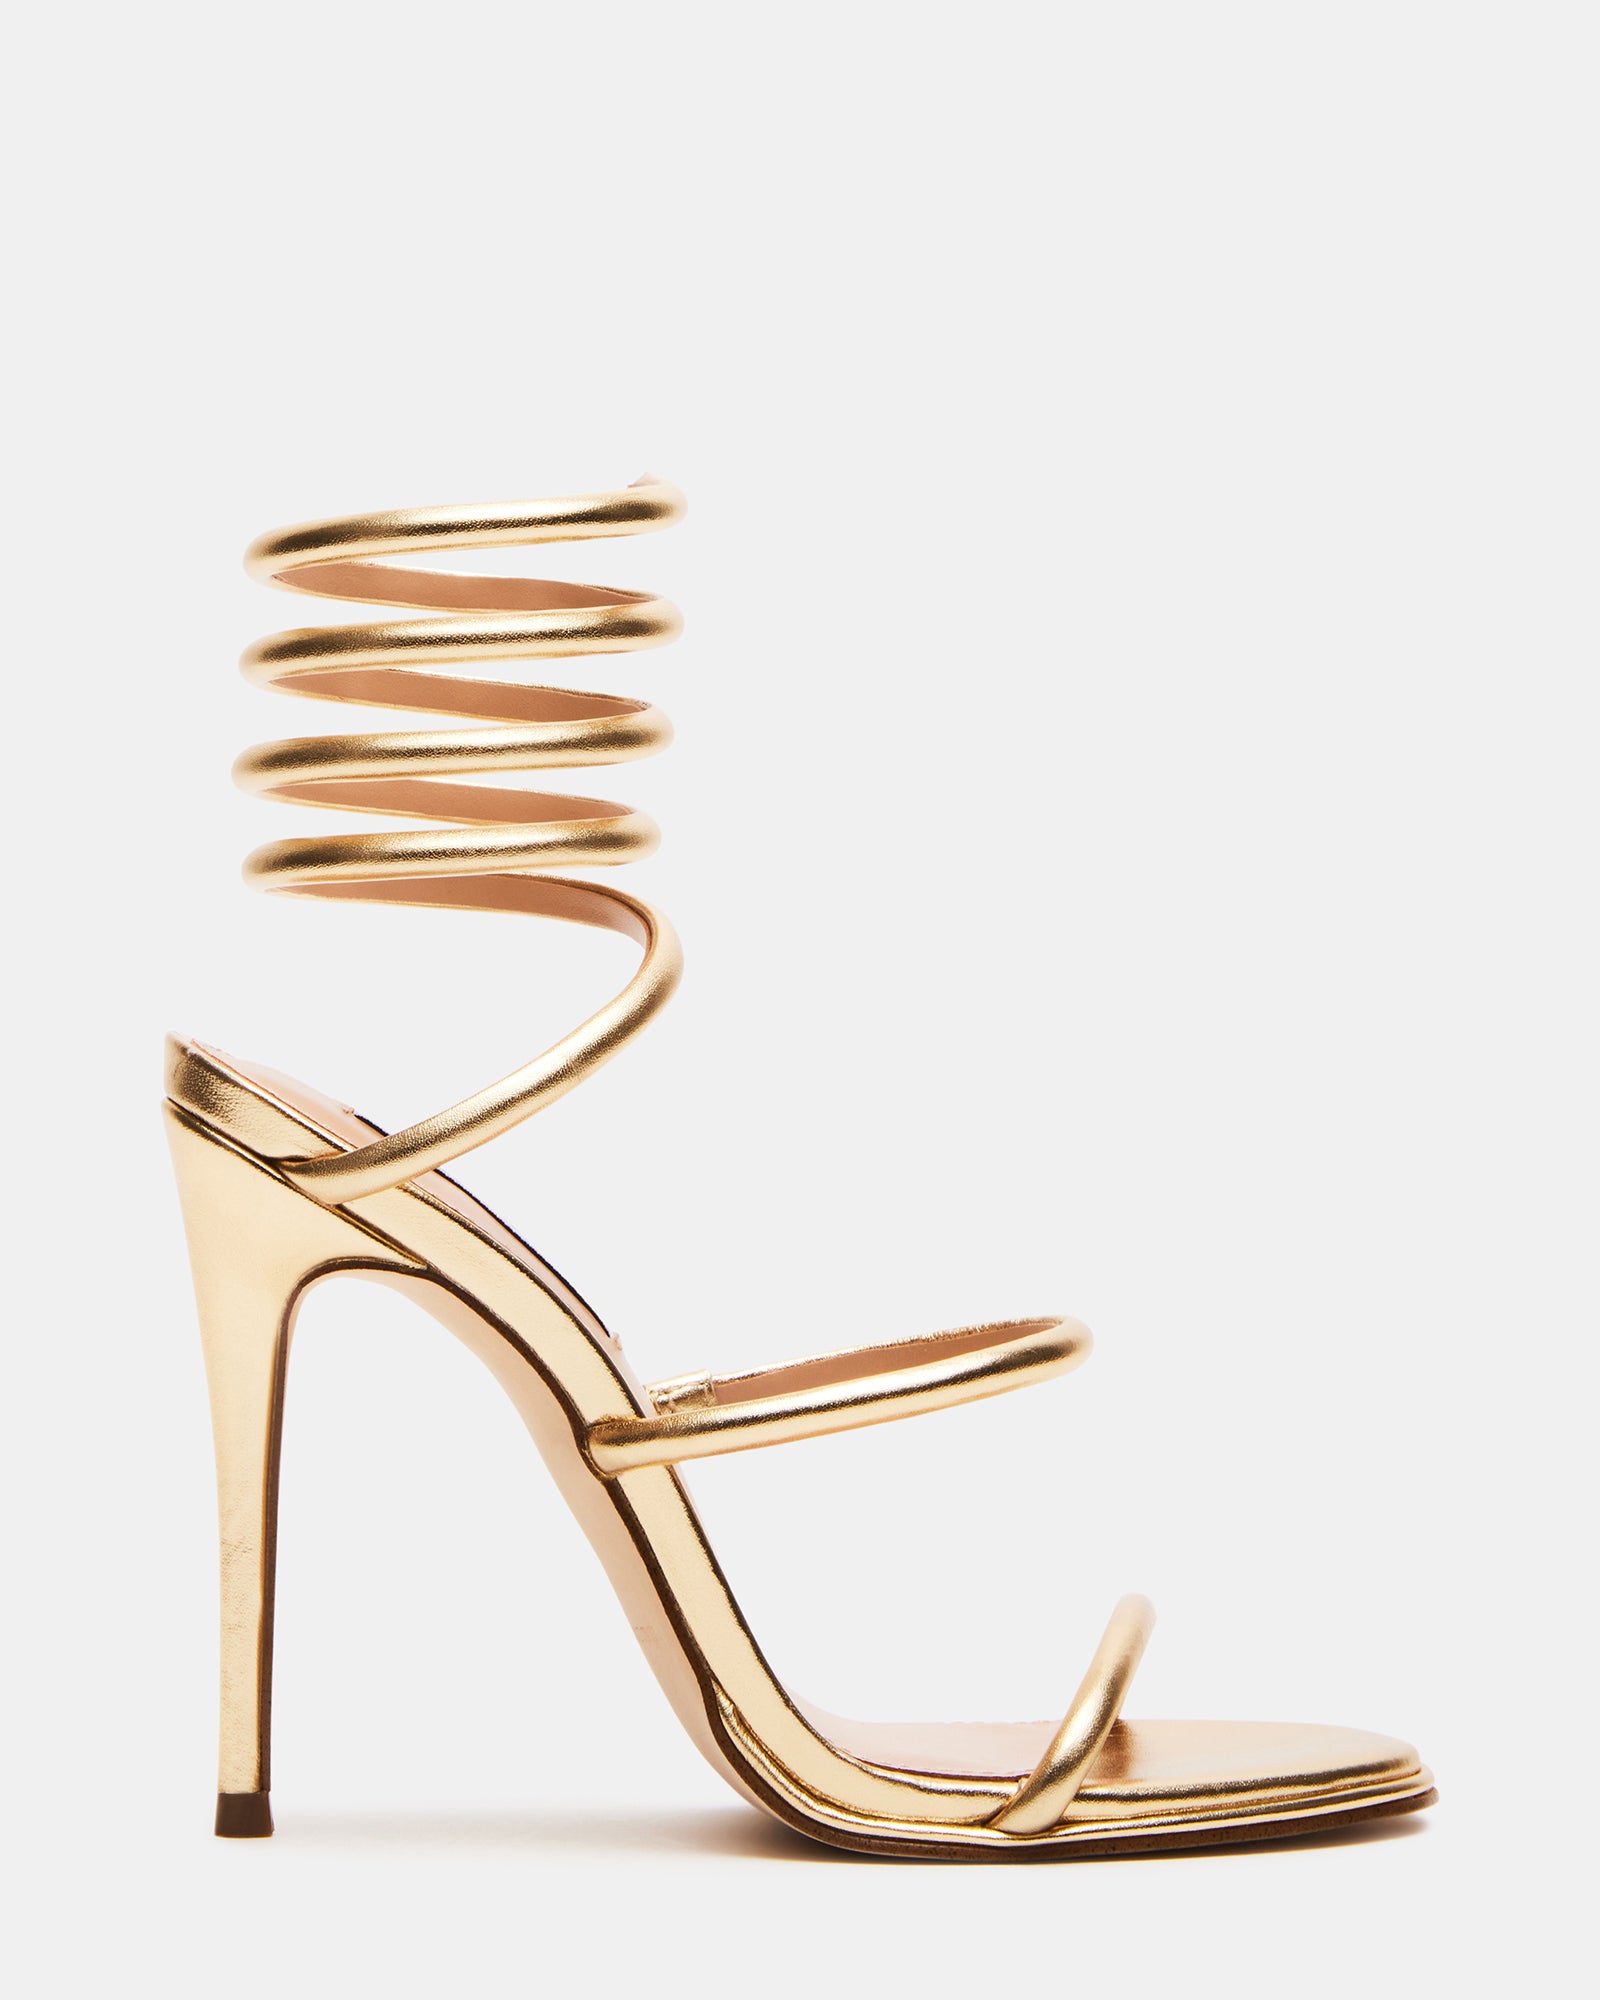 Gucci Allie Knotted Strappy Sandal, Gold | Heels, Strappy sandals, Gold  shoes